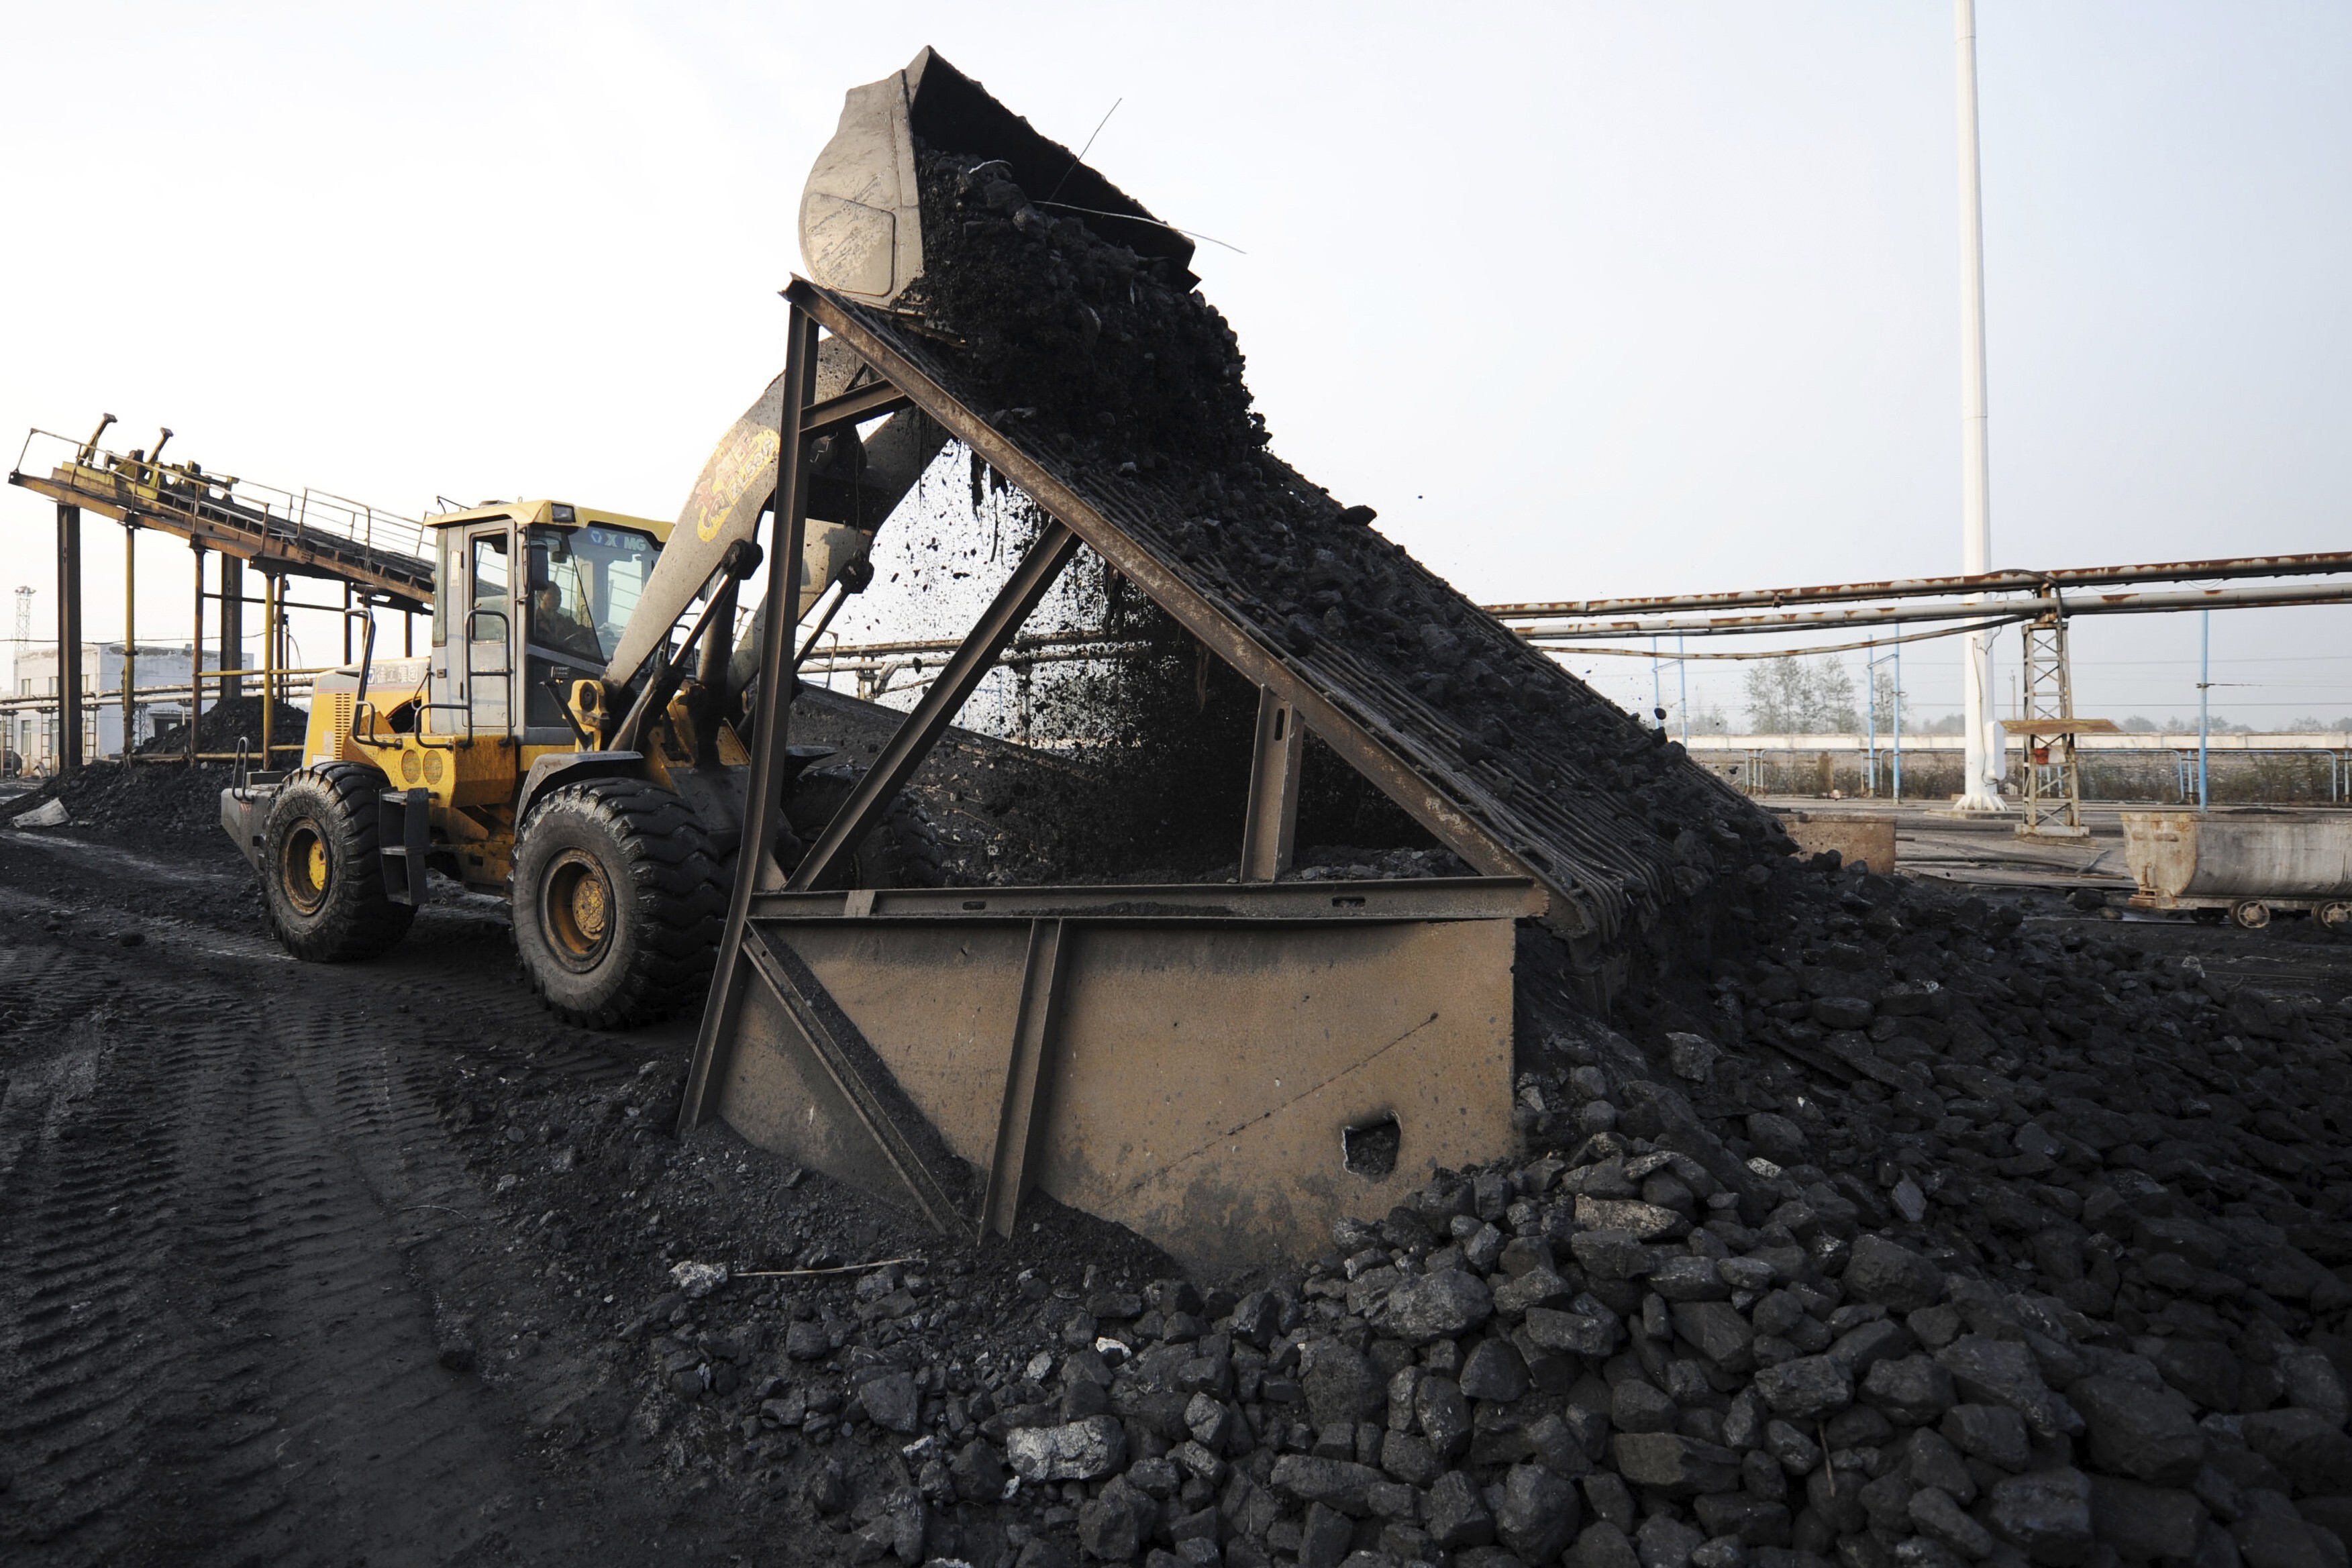 The price of thermal coal, used for power generation, has been soaring all year and hit new highs in recent weeks as not just China but other countries, including India, have been restocking critically low inventories. Photo: AP